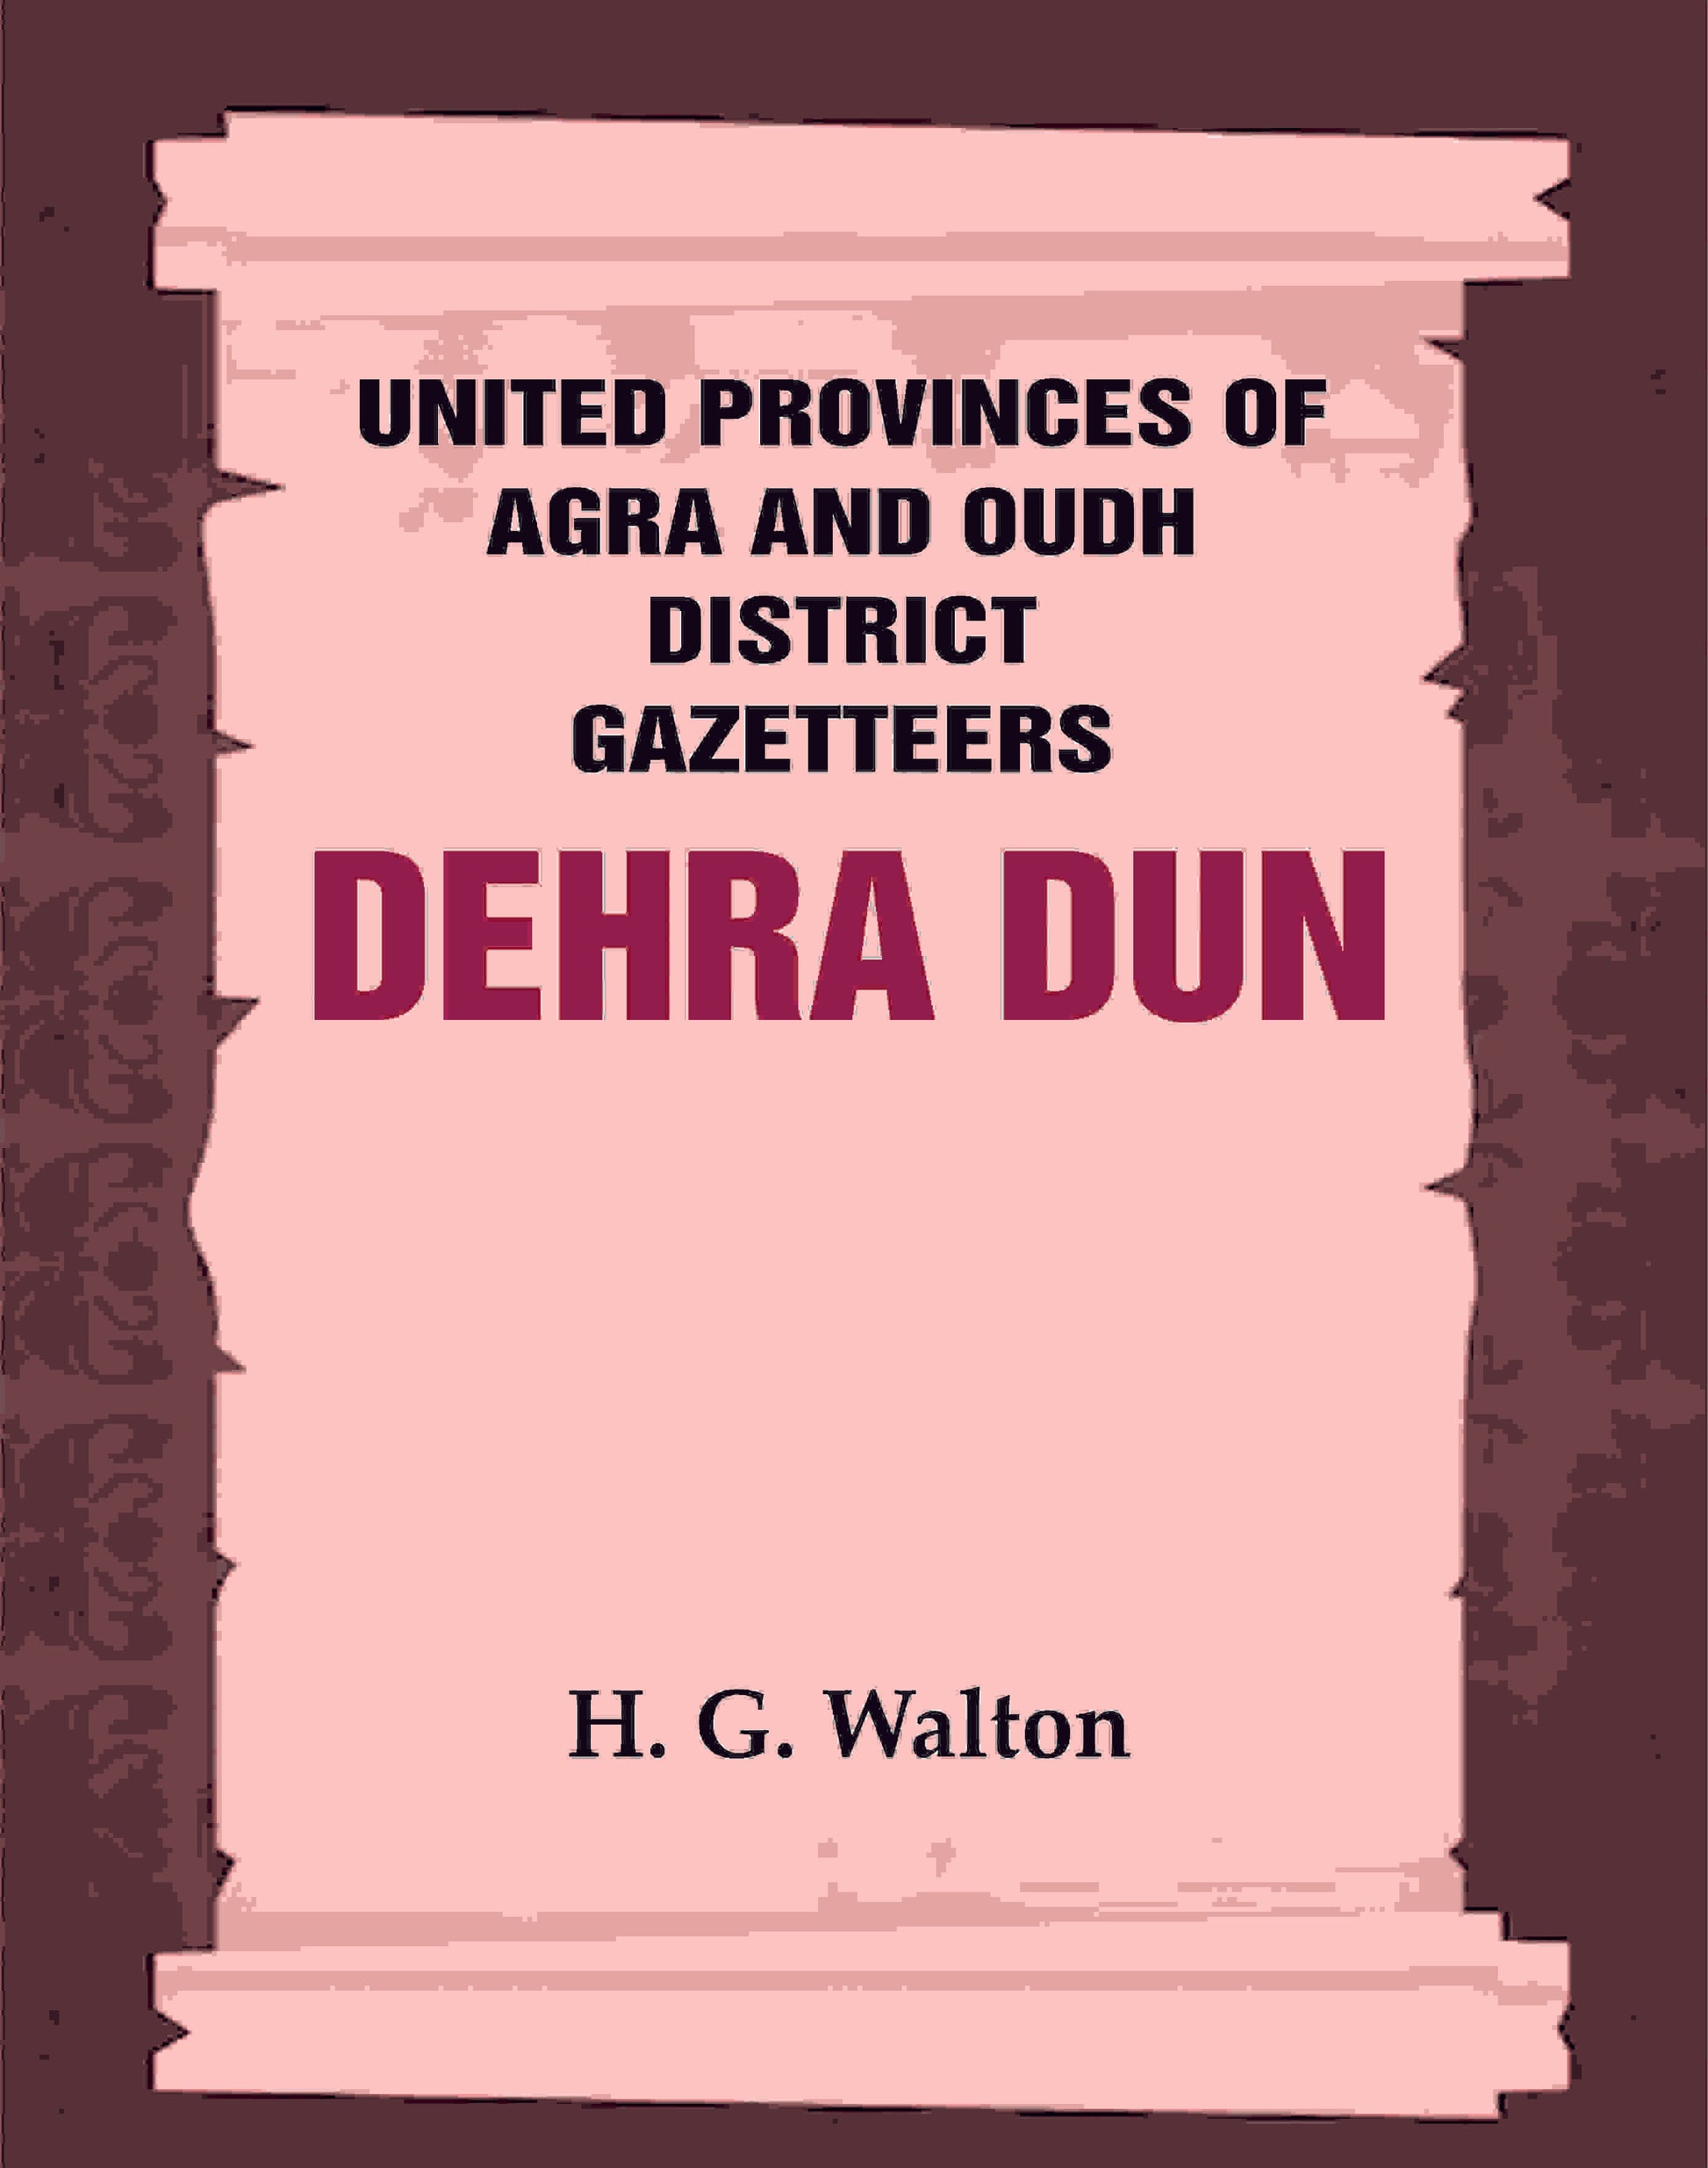 United Provinces of Agra and Oudh District Gazetteers: Dehra Dun